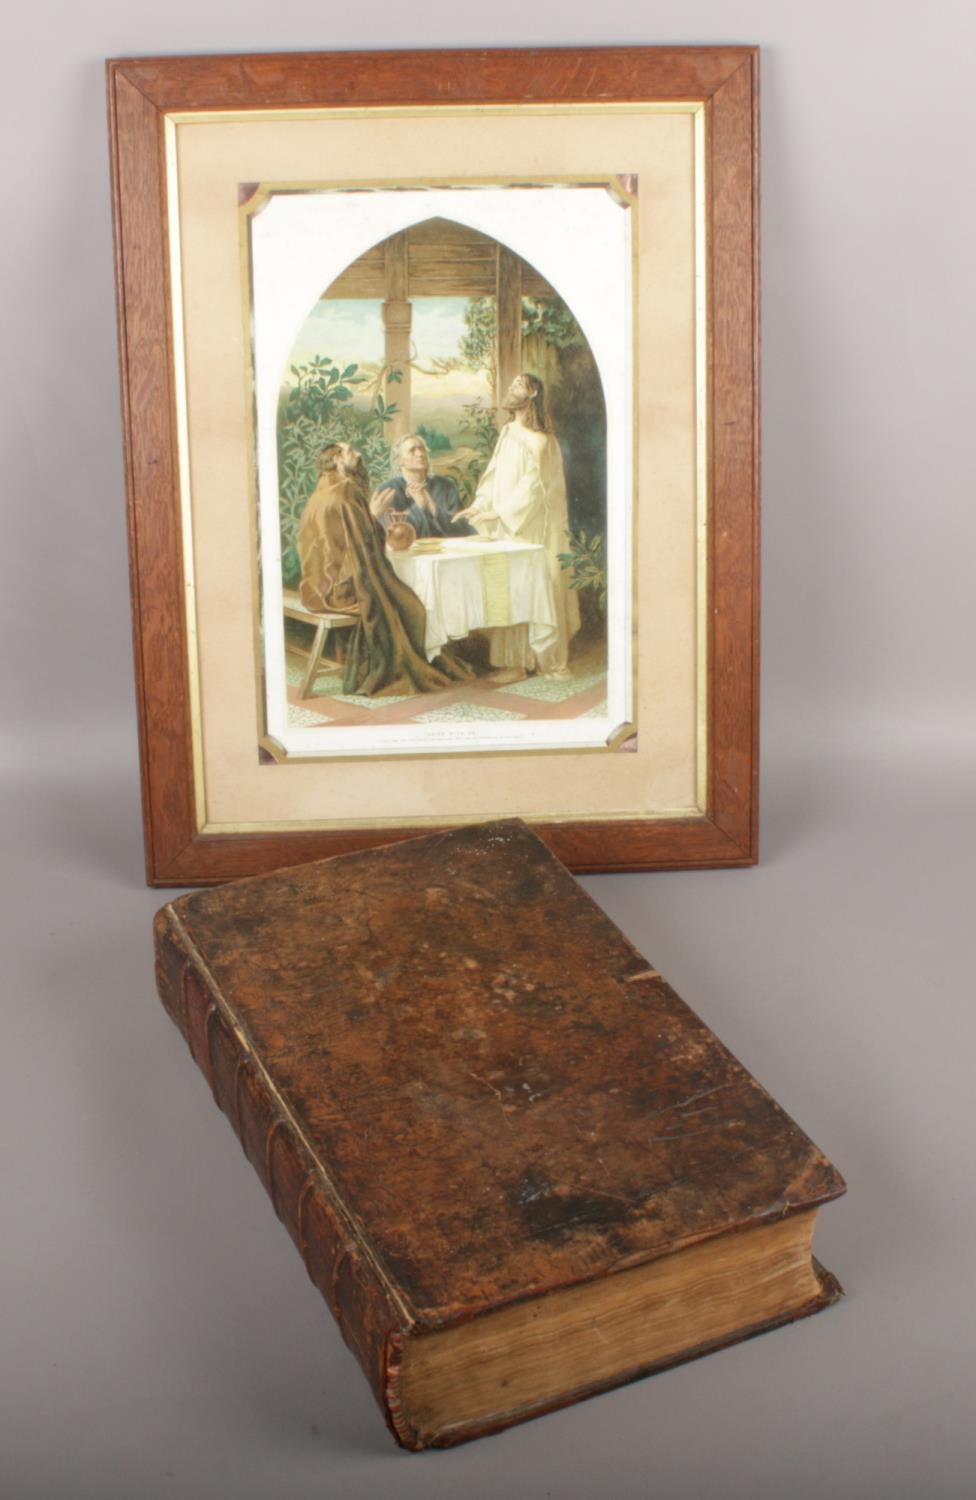 An 1810 leather bound family bible with monochrome plates along with a framed religious picture,